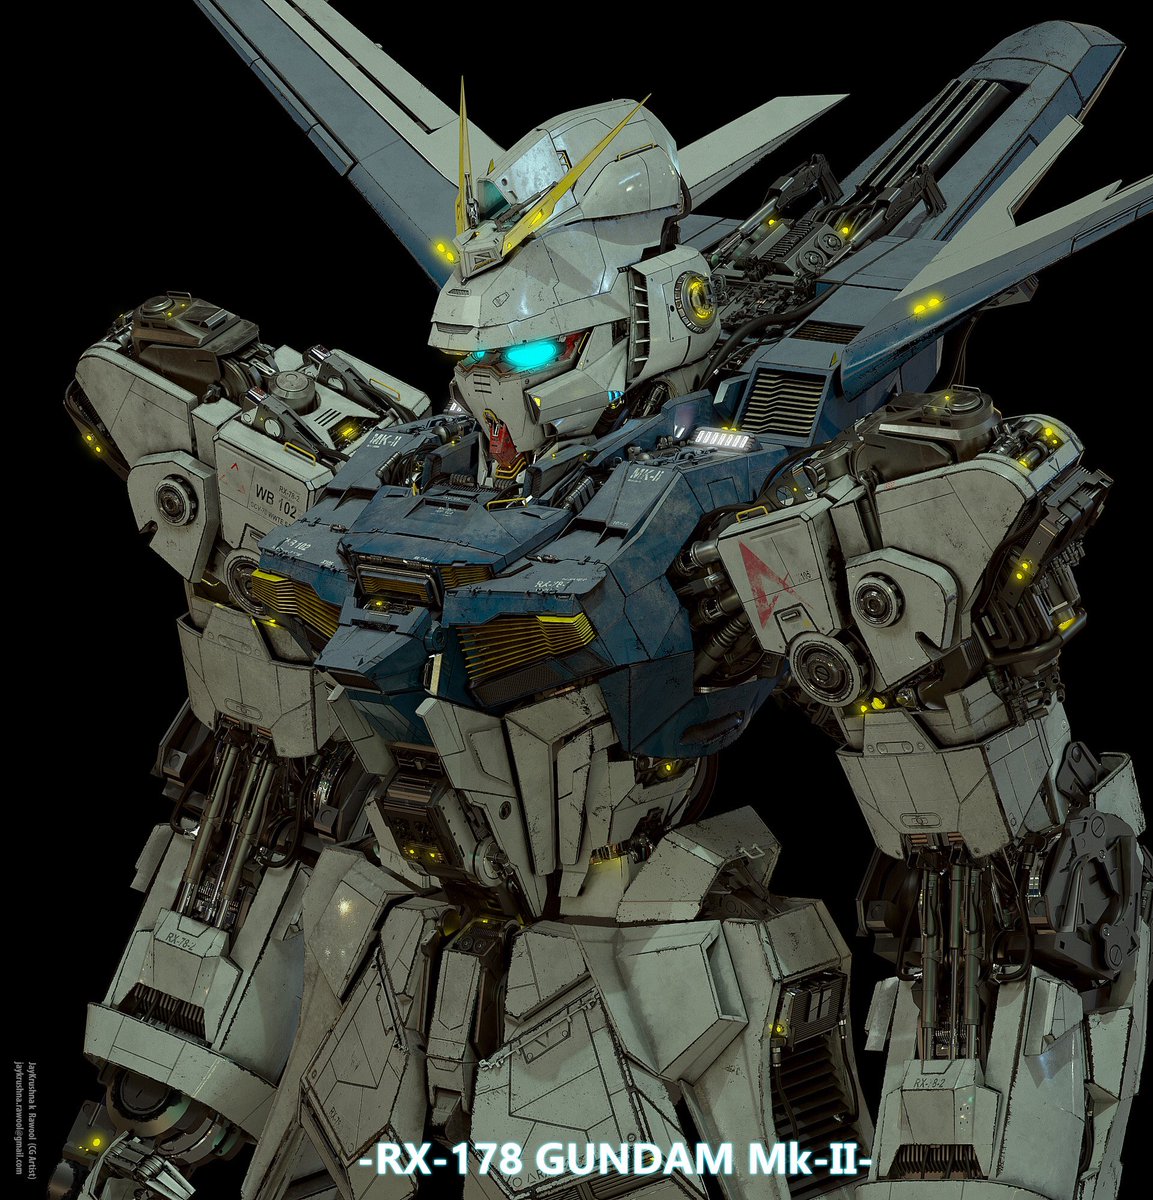 Gundam - Combat Mobile Suit - Custom Build RX-178-2
It was modeled in Autodesk Maya and Pixologic Zbrush. Allegorithmic Substance Painter Autodesk Mudbox and 
Adobe Photoshop for texturing. Rendered in vray(Maya). 
By Jaykrushna Rawool
(3D Modeler at Double Negative)
.
Source:…